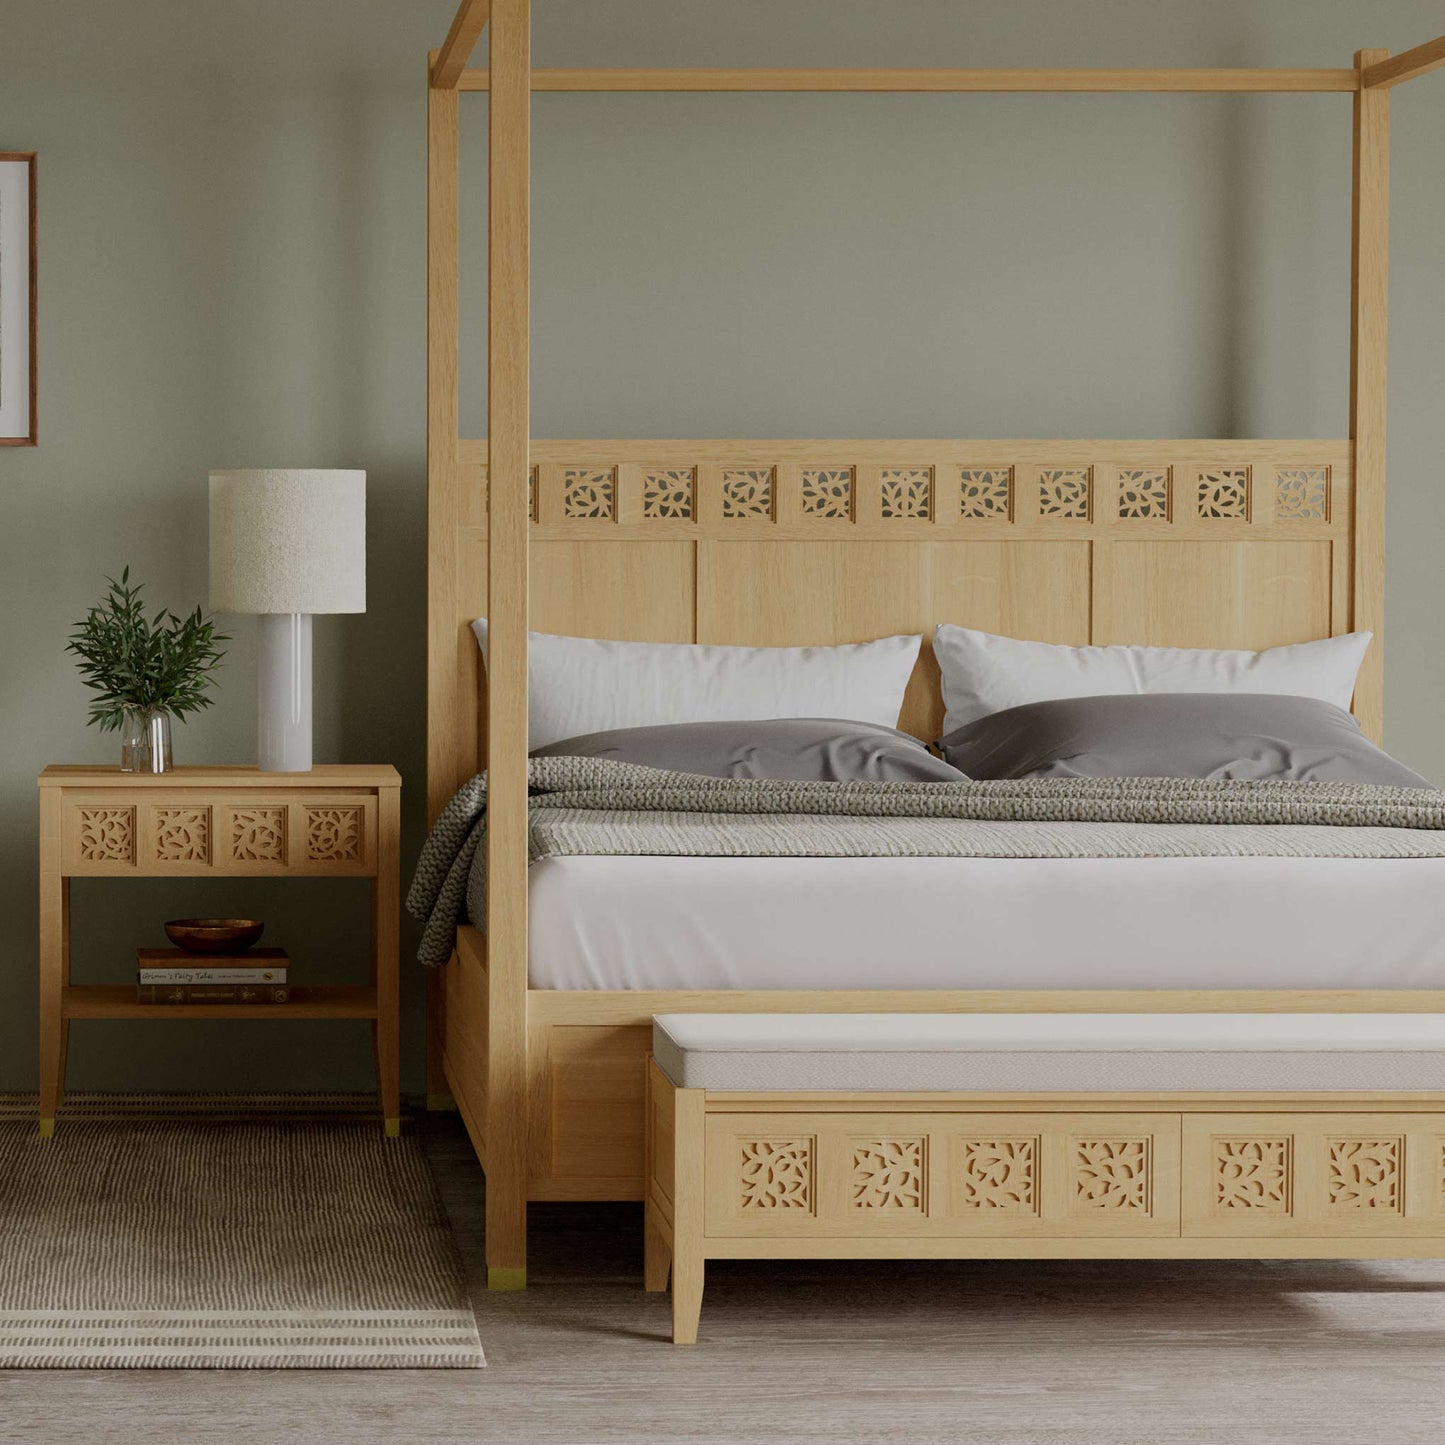 Surrey Hills Four-Poster Bed, Cal King